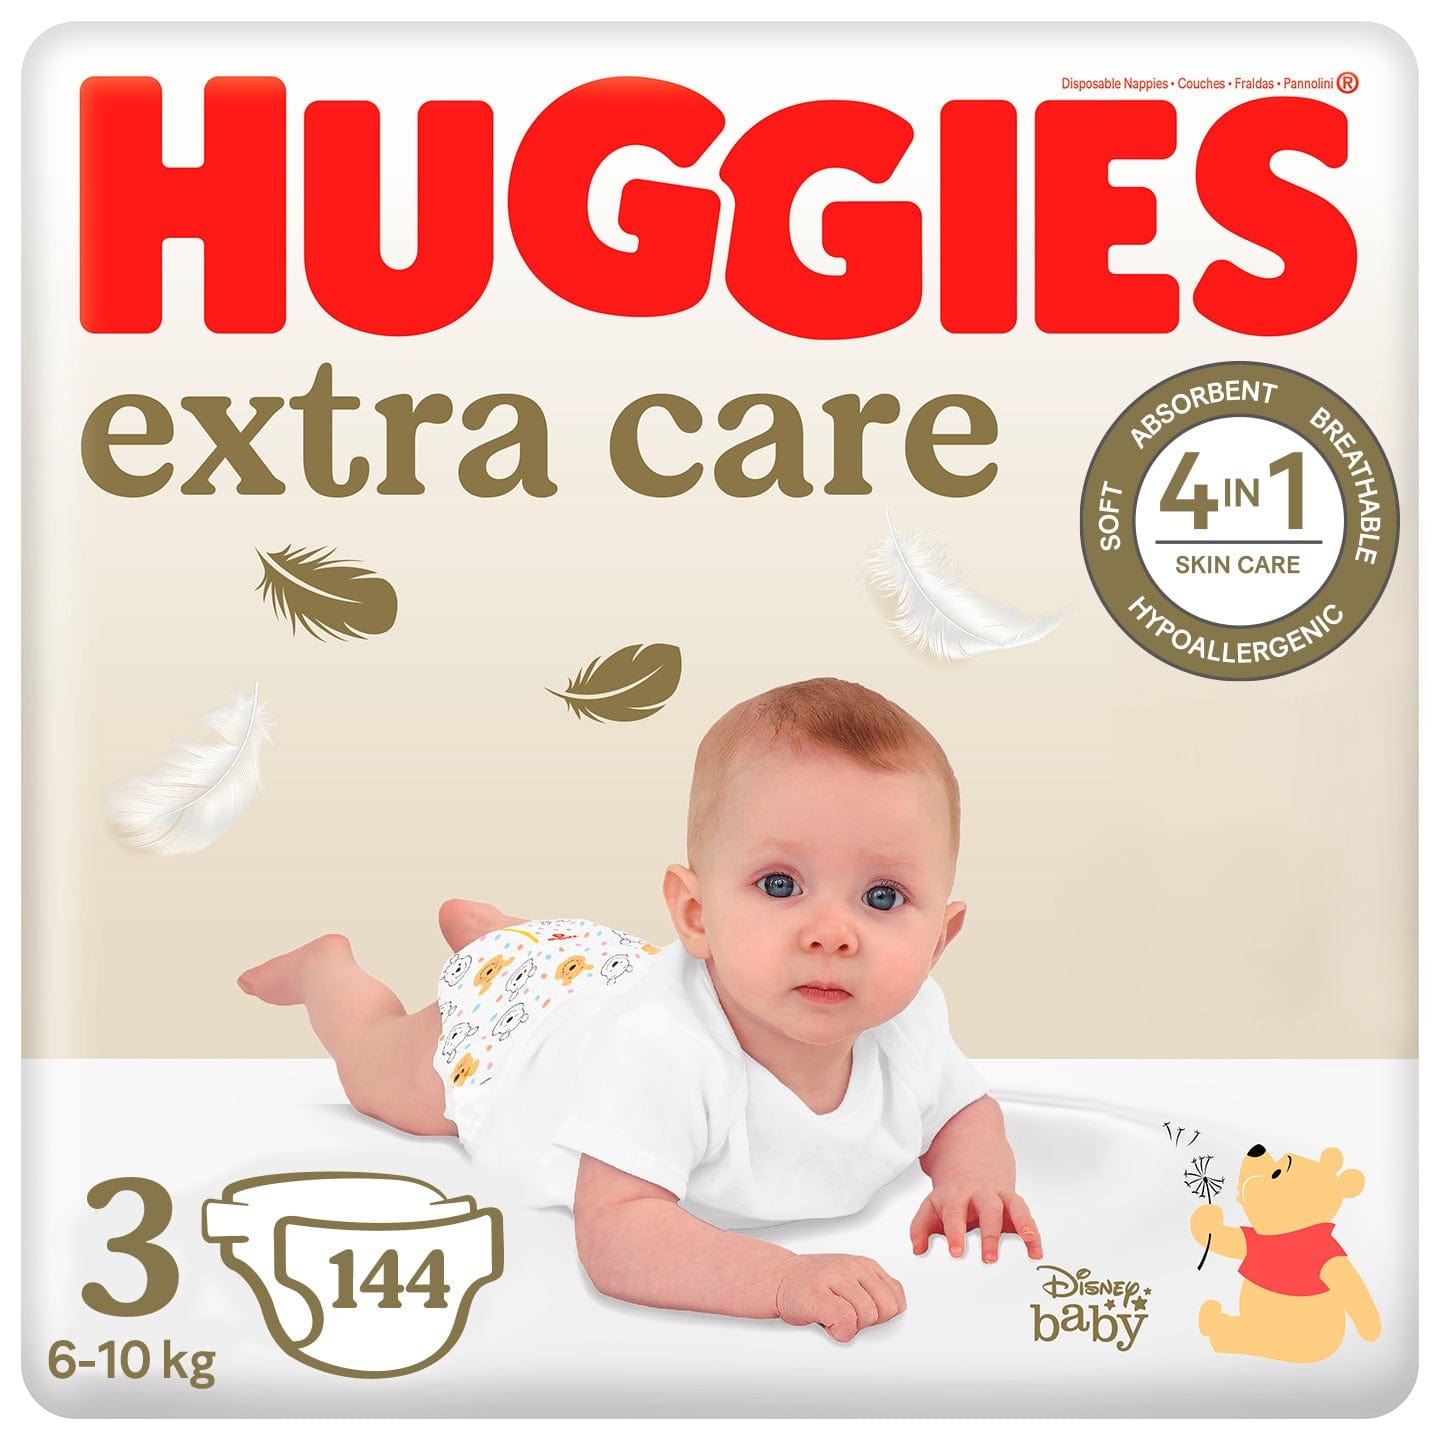 rossnę pampers premium care pieluchy 4